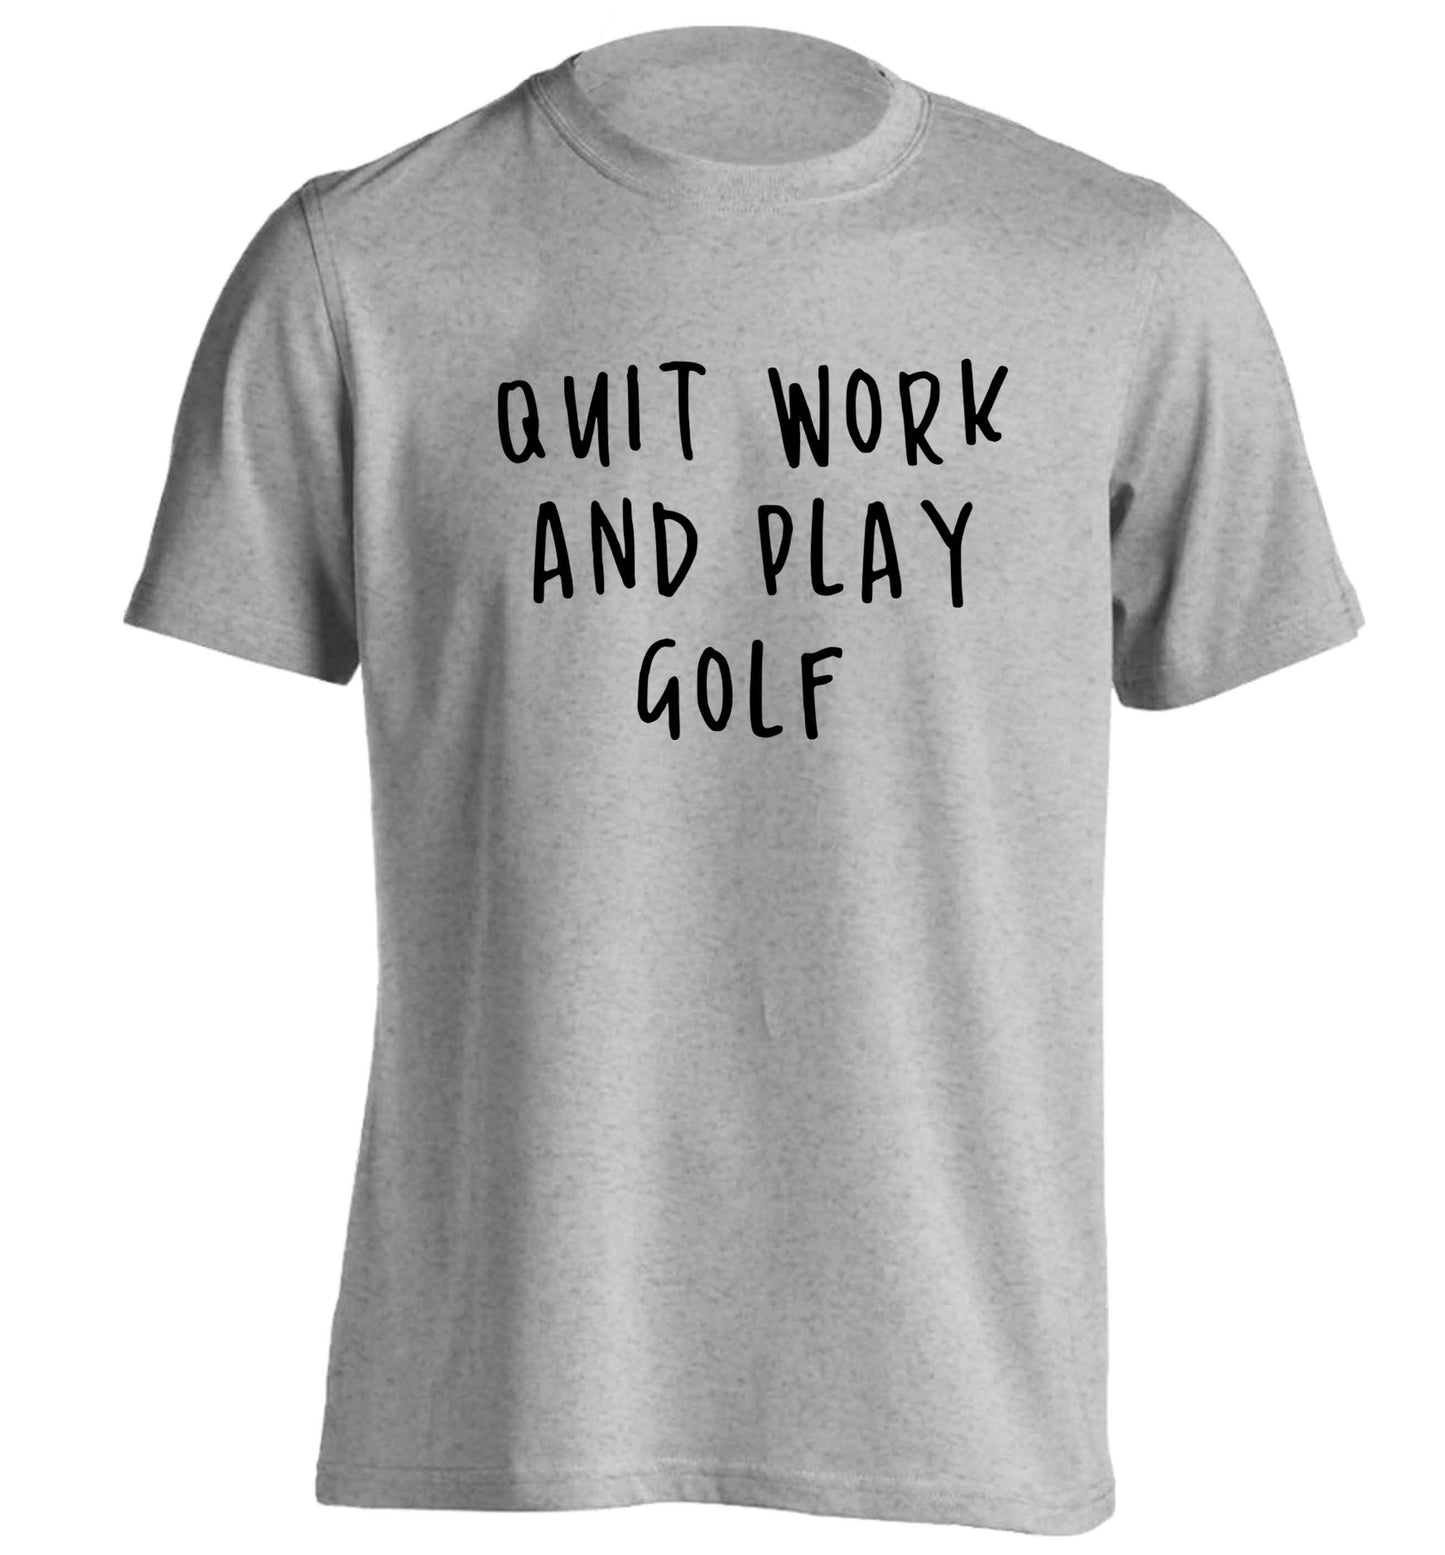 Quit work and play golf adults unisex grey Tshirt 2XL